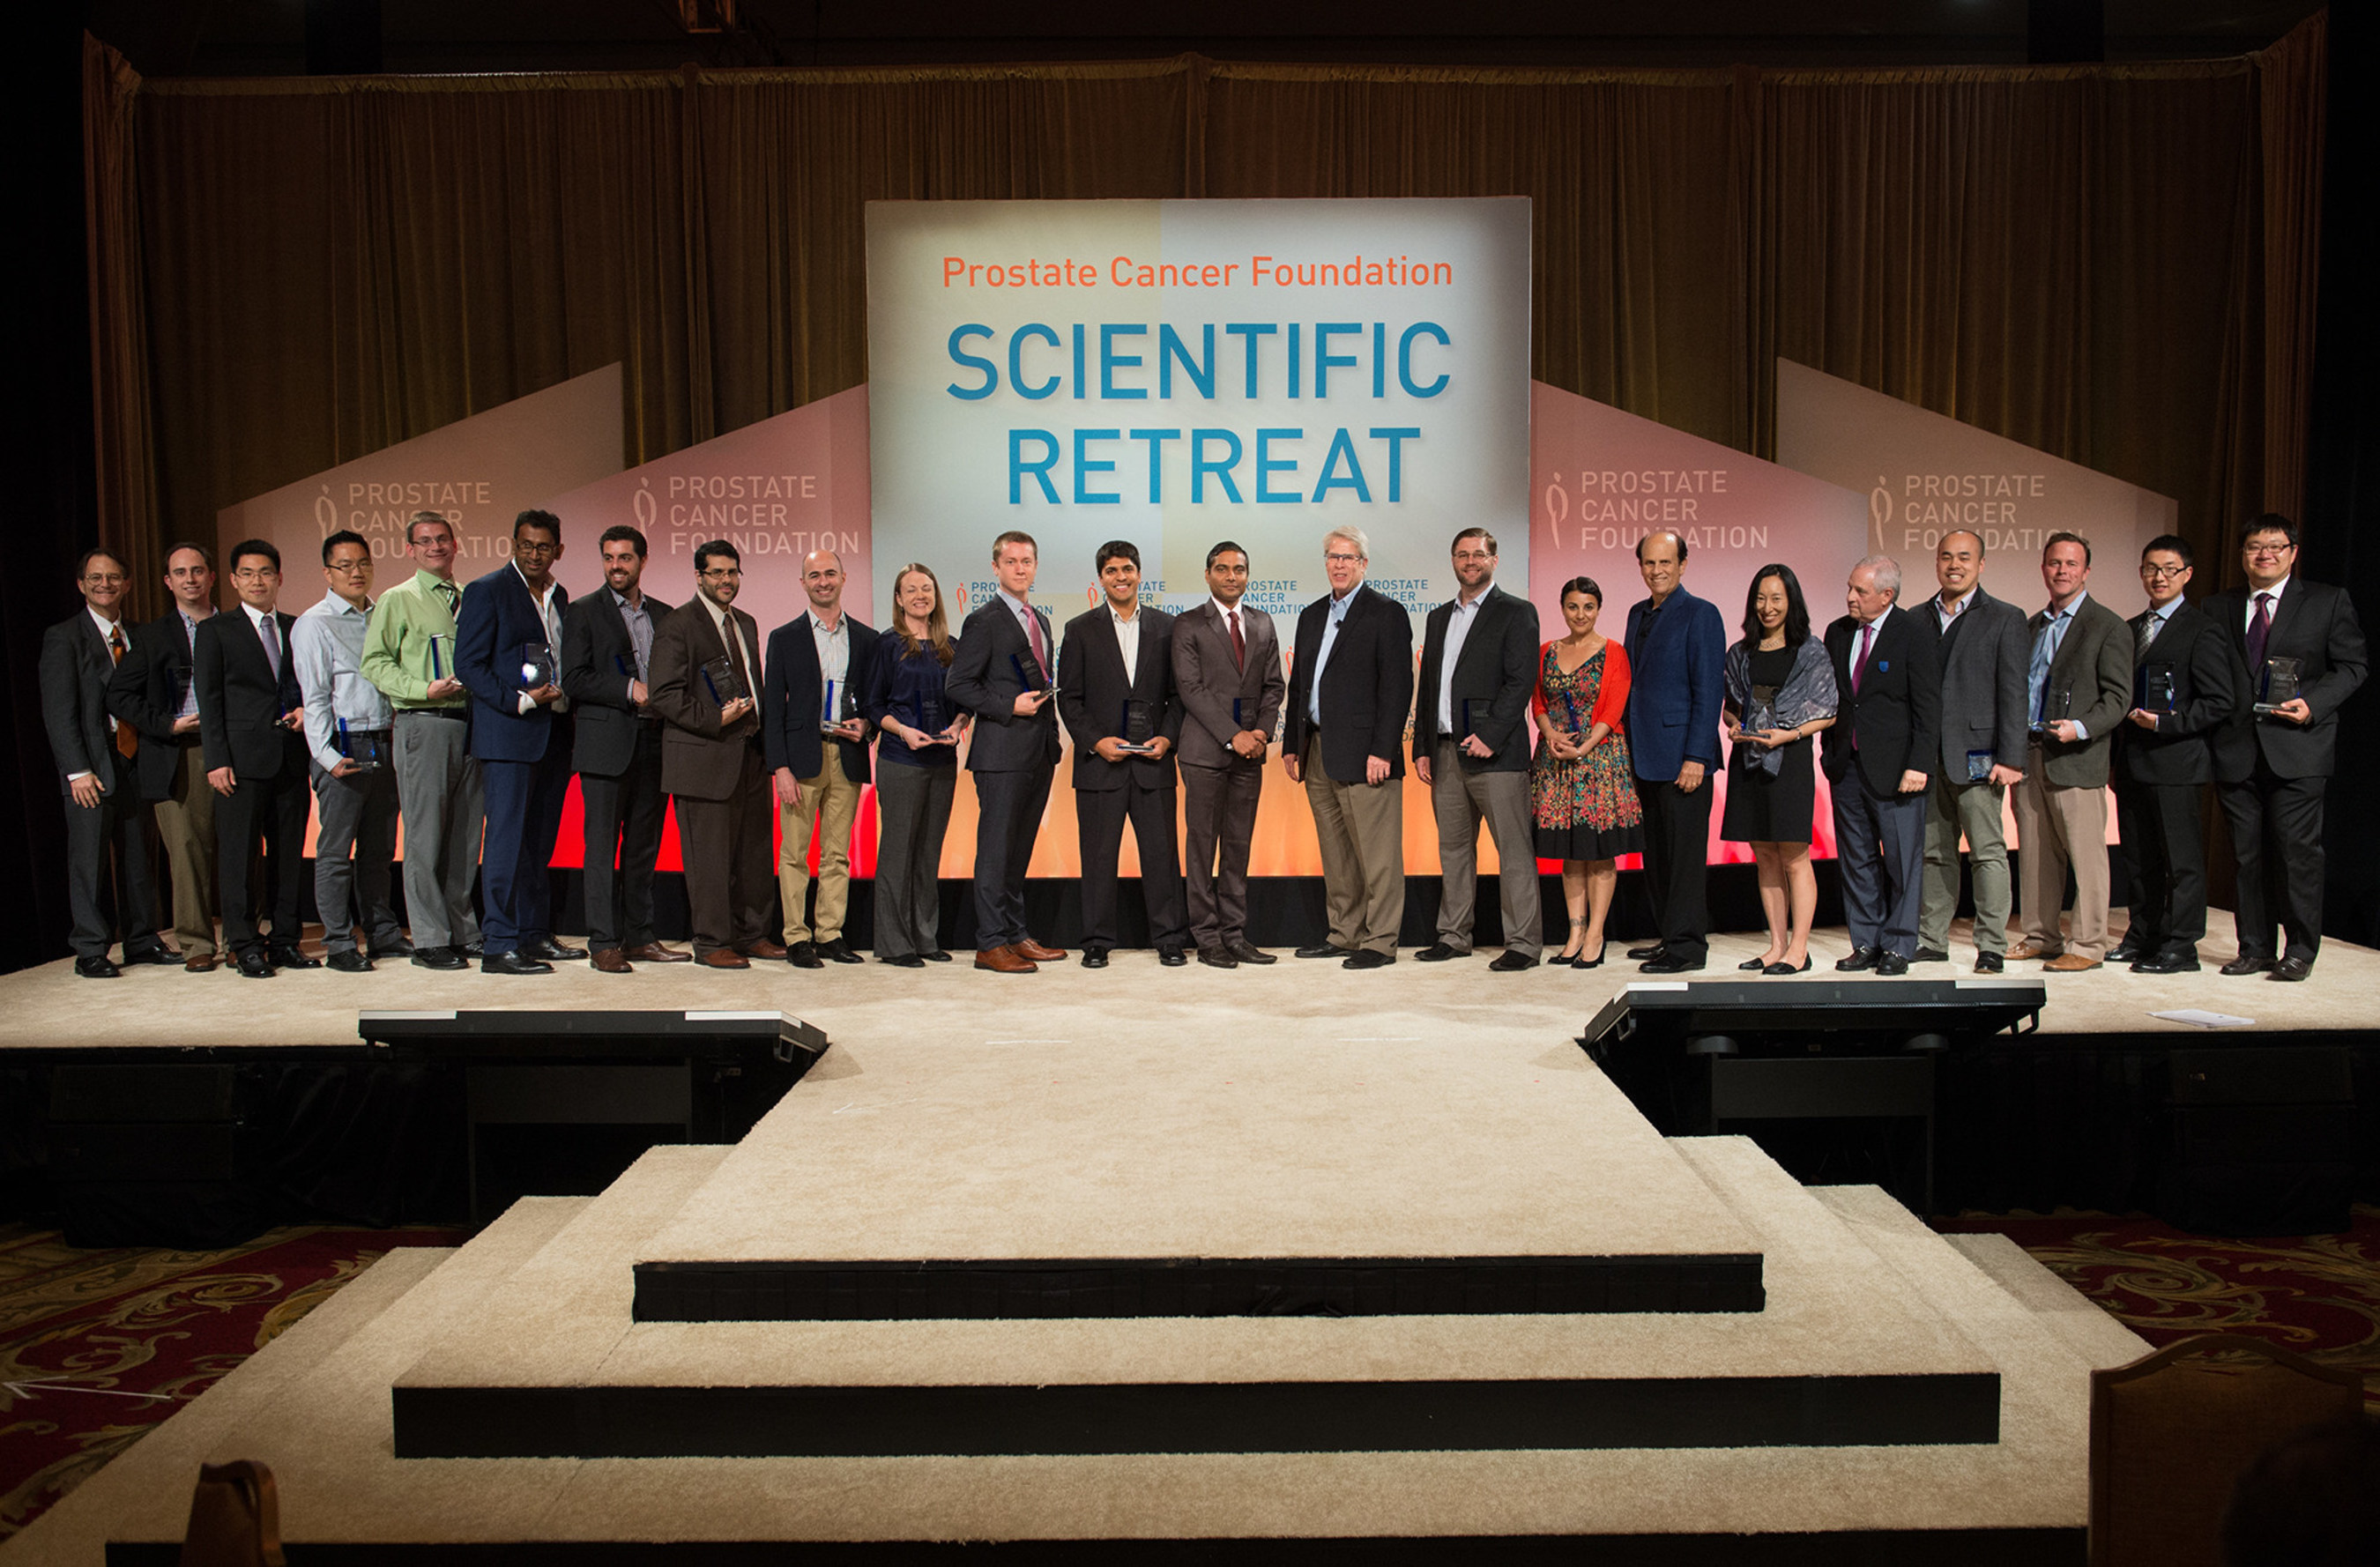 Prostate Cancer Foundation awards 19 new Young Investigators at PCF's 22nd Annual Scientific Retreat to accelerate prostate cancer research breakthroughs. For more information about their research initiatives, visit: http://bit.ly/1W6wyrG